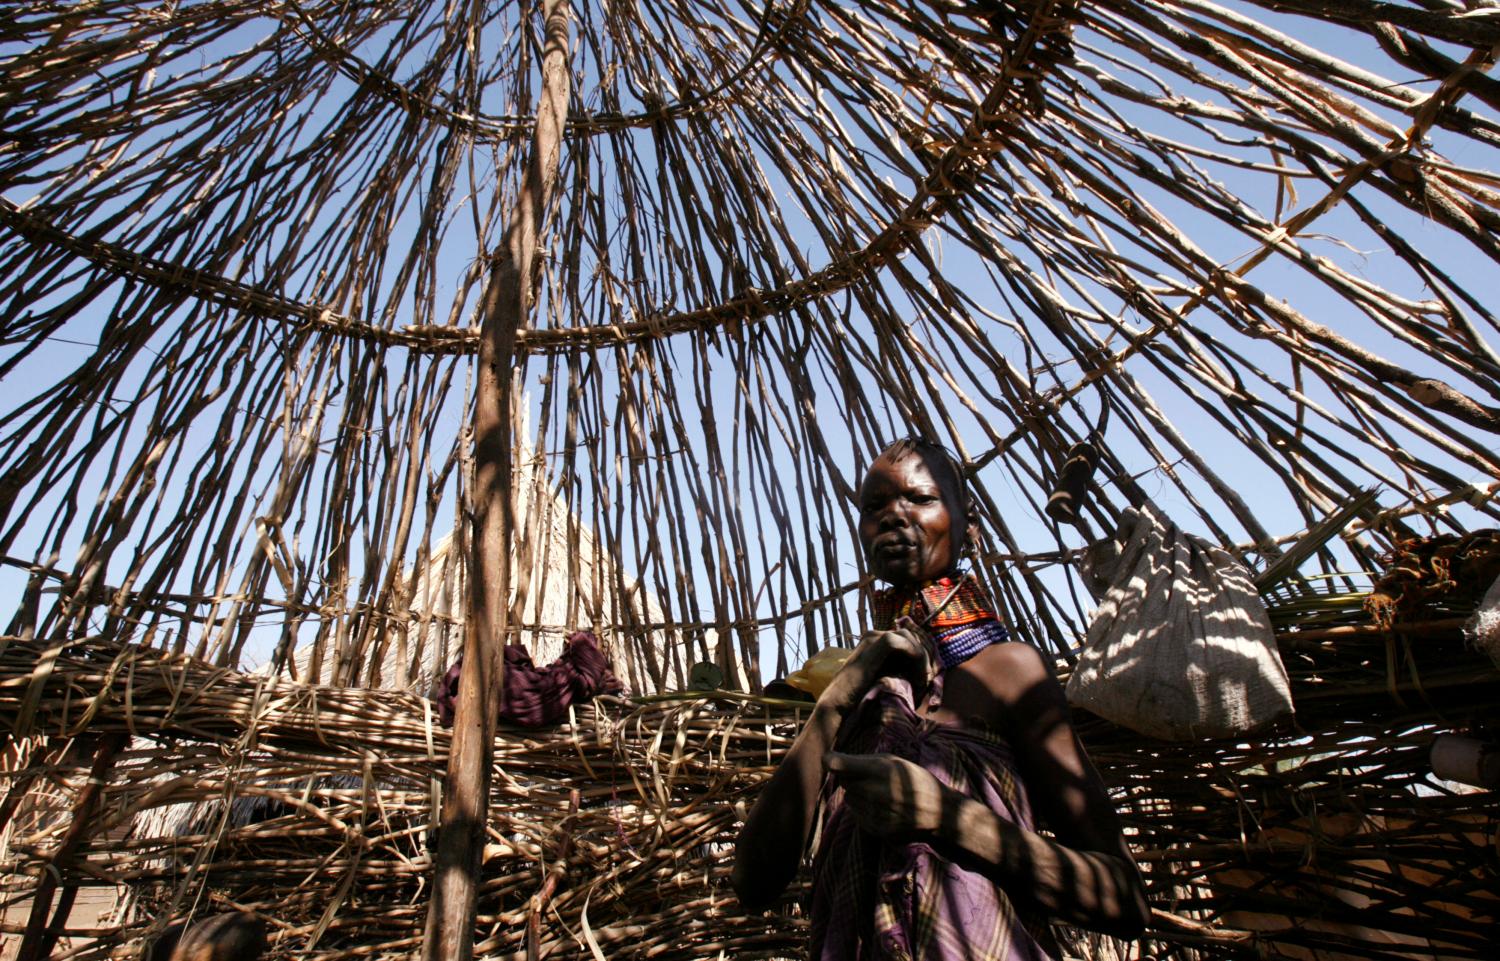 A Turkana woman walks inside her makeshift house in Lobei village of Turkana district in northwest Kenya, October 2, 2009. The Turkana people are among the worst affected by the drought since they have also lost the ability to migrate as a result of conflict with the neighbouring communities leading to livestock deaths as a result of extreme heat, lack water and lack of pasture. REUTERS/Thomas Mukoya (KENYA SOCIETY ENVIRONMENT CONFLICT)